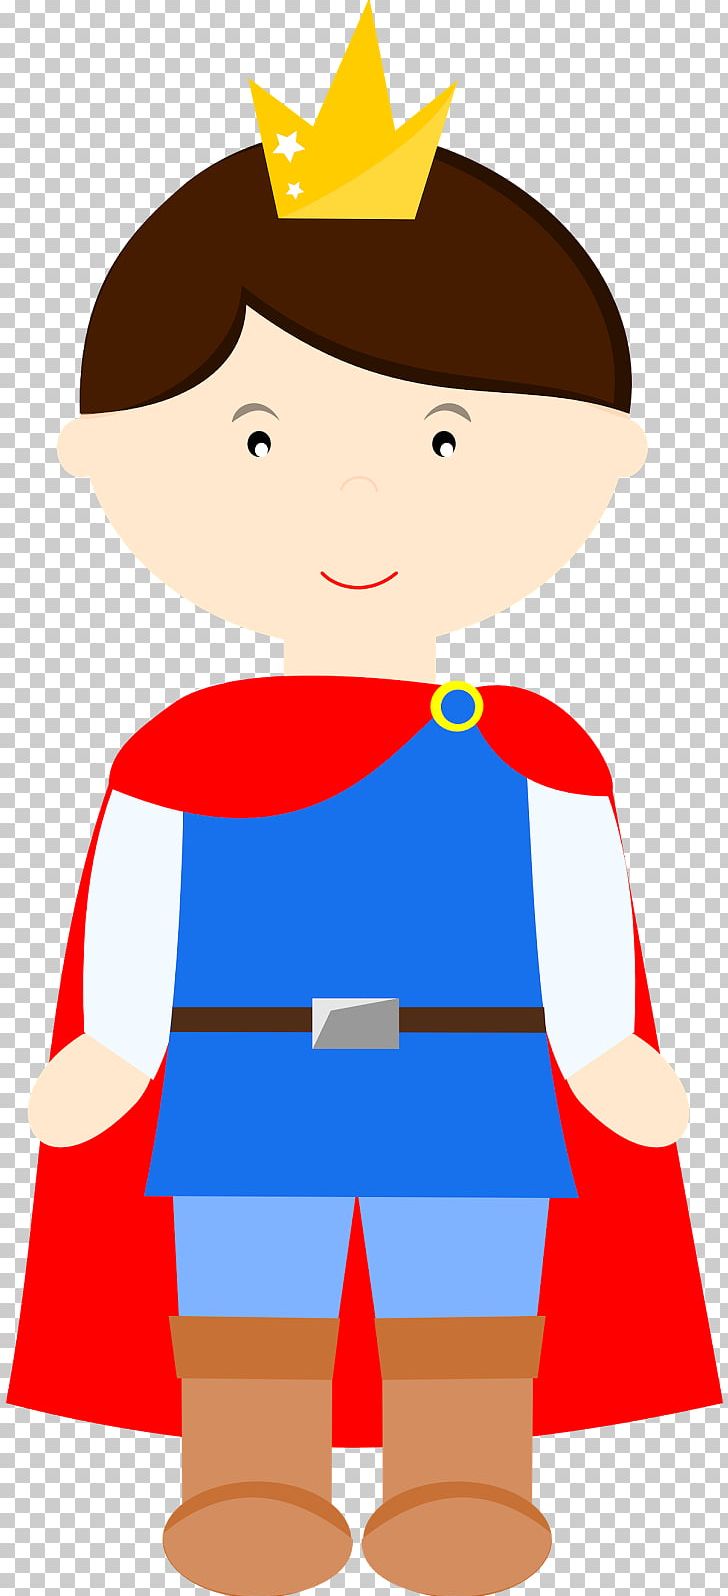 Princess Snow White PNG, Clipart, Art, Boy, Cartoon, Castanets, Child Free PNG Download